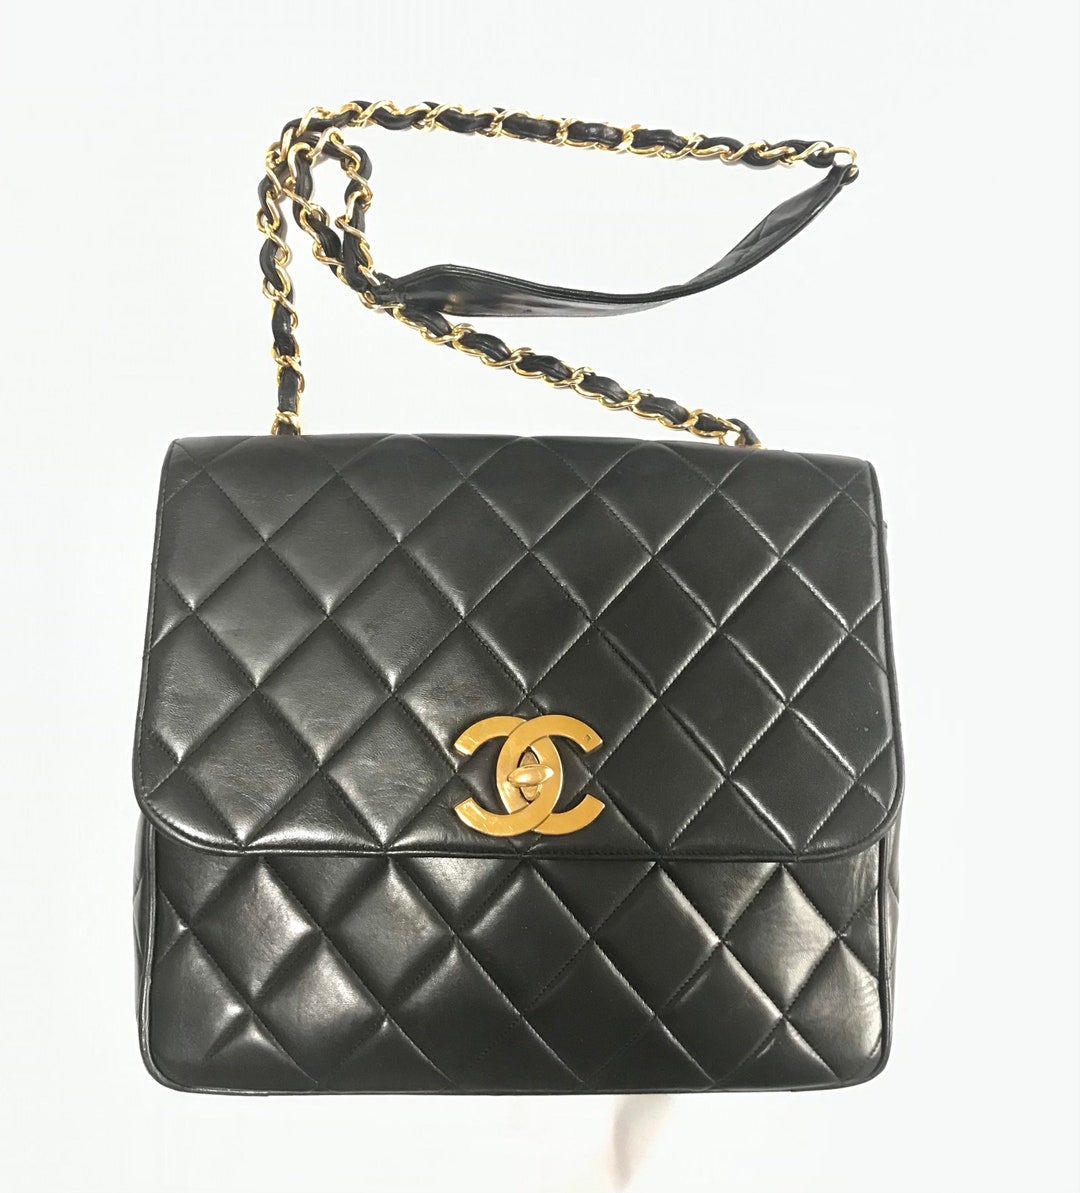 Vintage Chanel Jumbo 2.55 quilted leather flap bag (163 245 UAH) ❤ liked on  Polyvore featuring bags, handbags, …